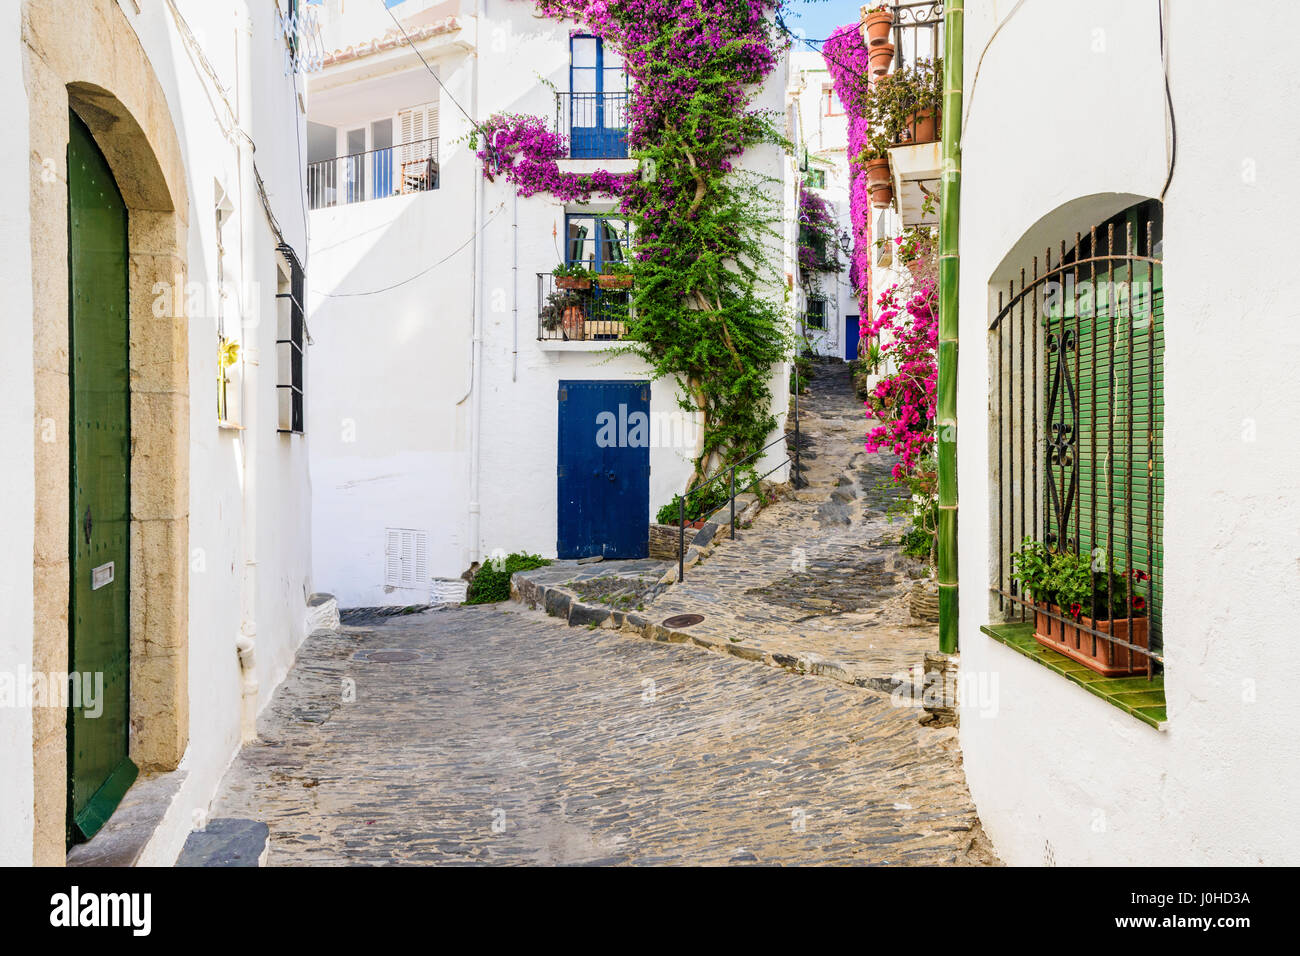 Whitewashed bougainvillea covered buildings and old town cobble streets of Cadaques Town, Costa Brava, Spain Stock Photo